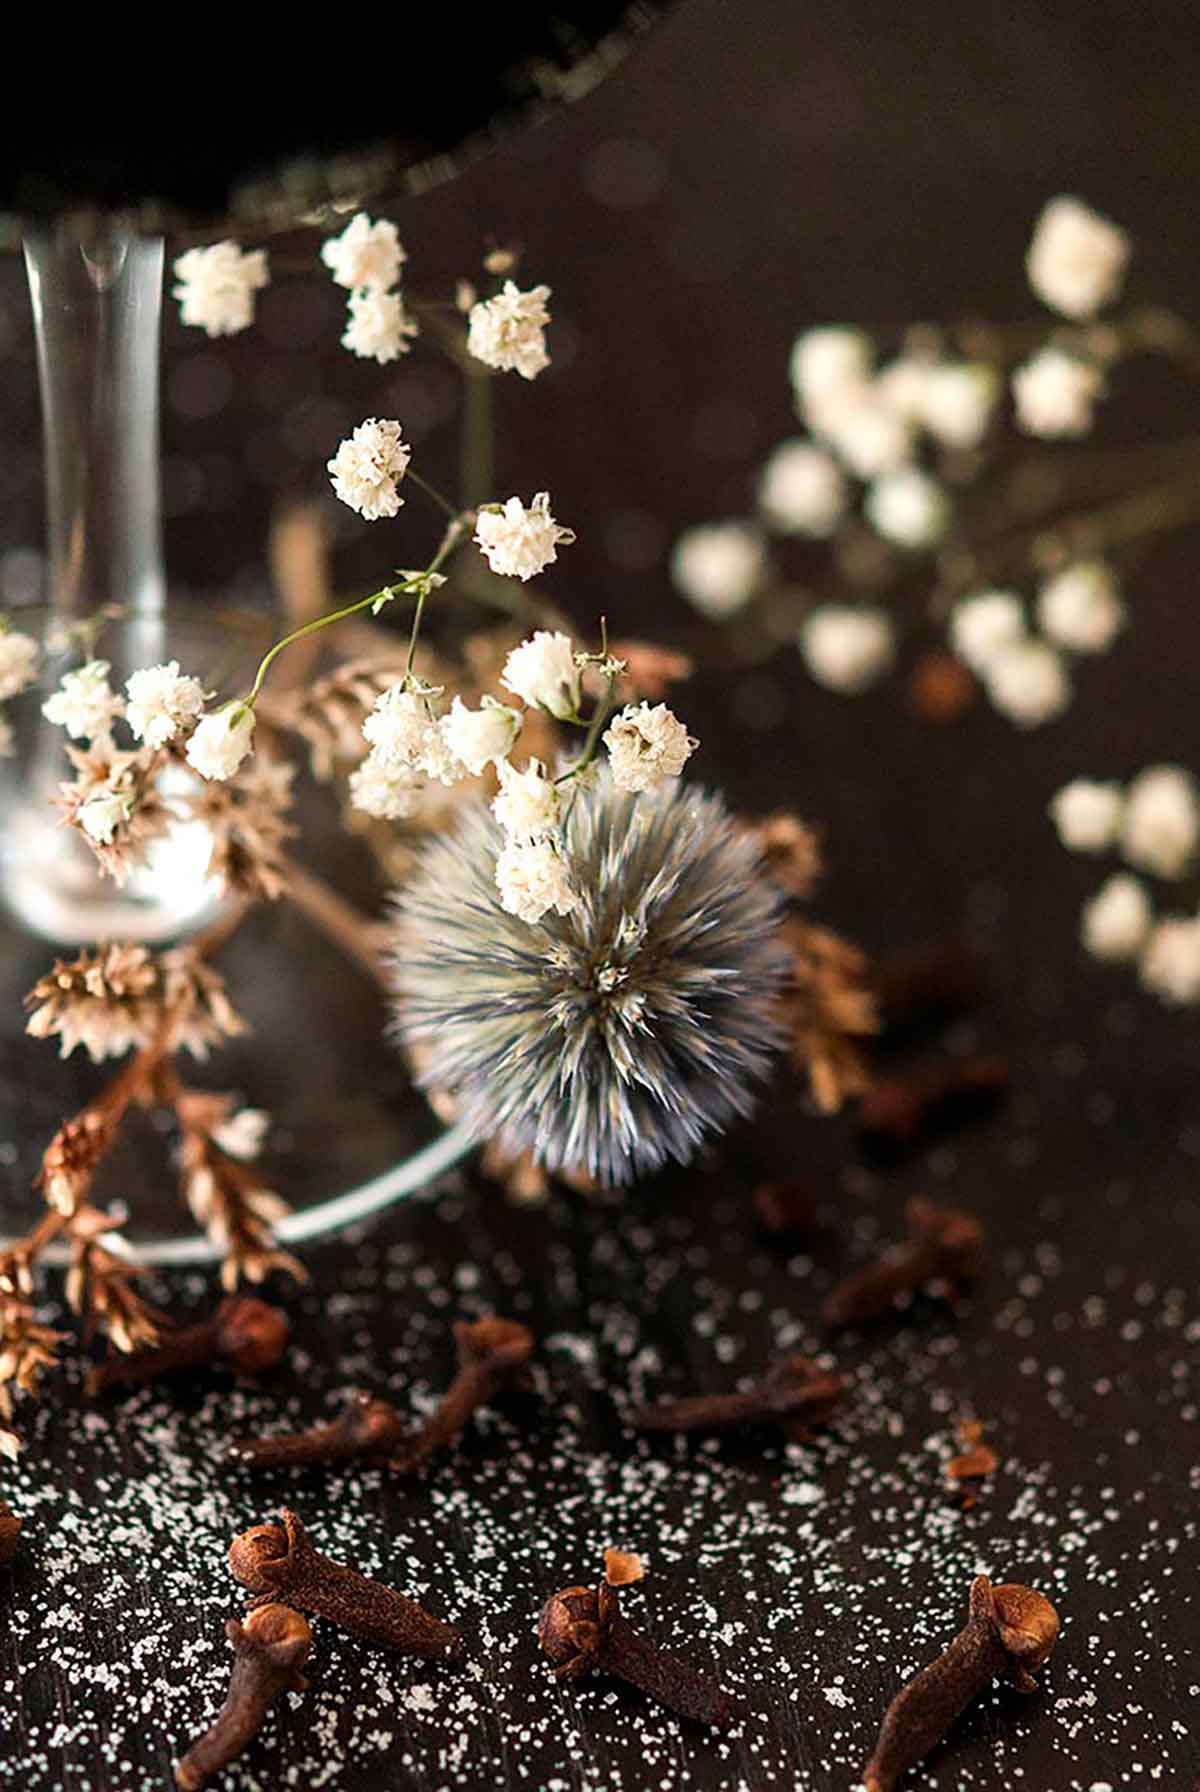 A few dry flowers at the base of a cocktail glass on a black table sprinkled with sugar.